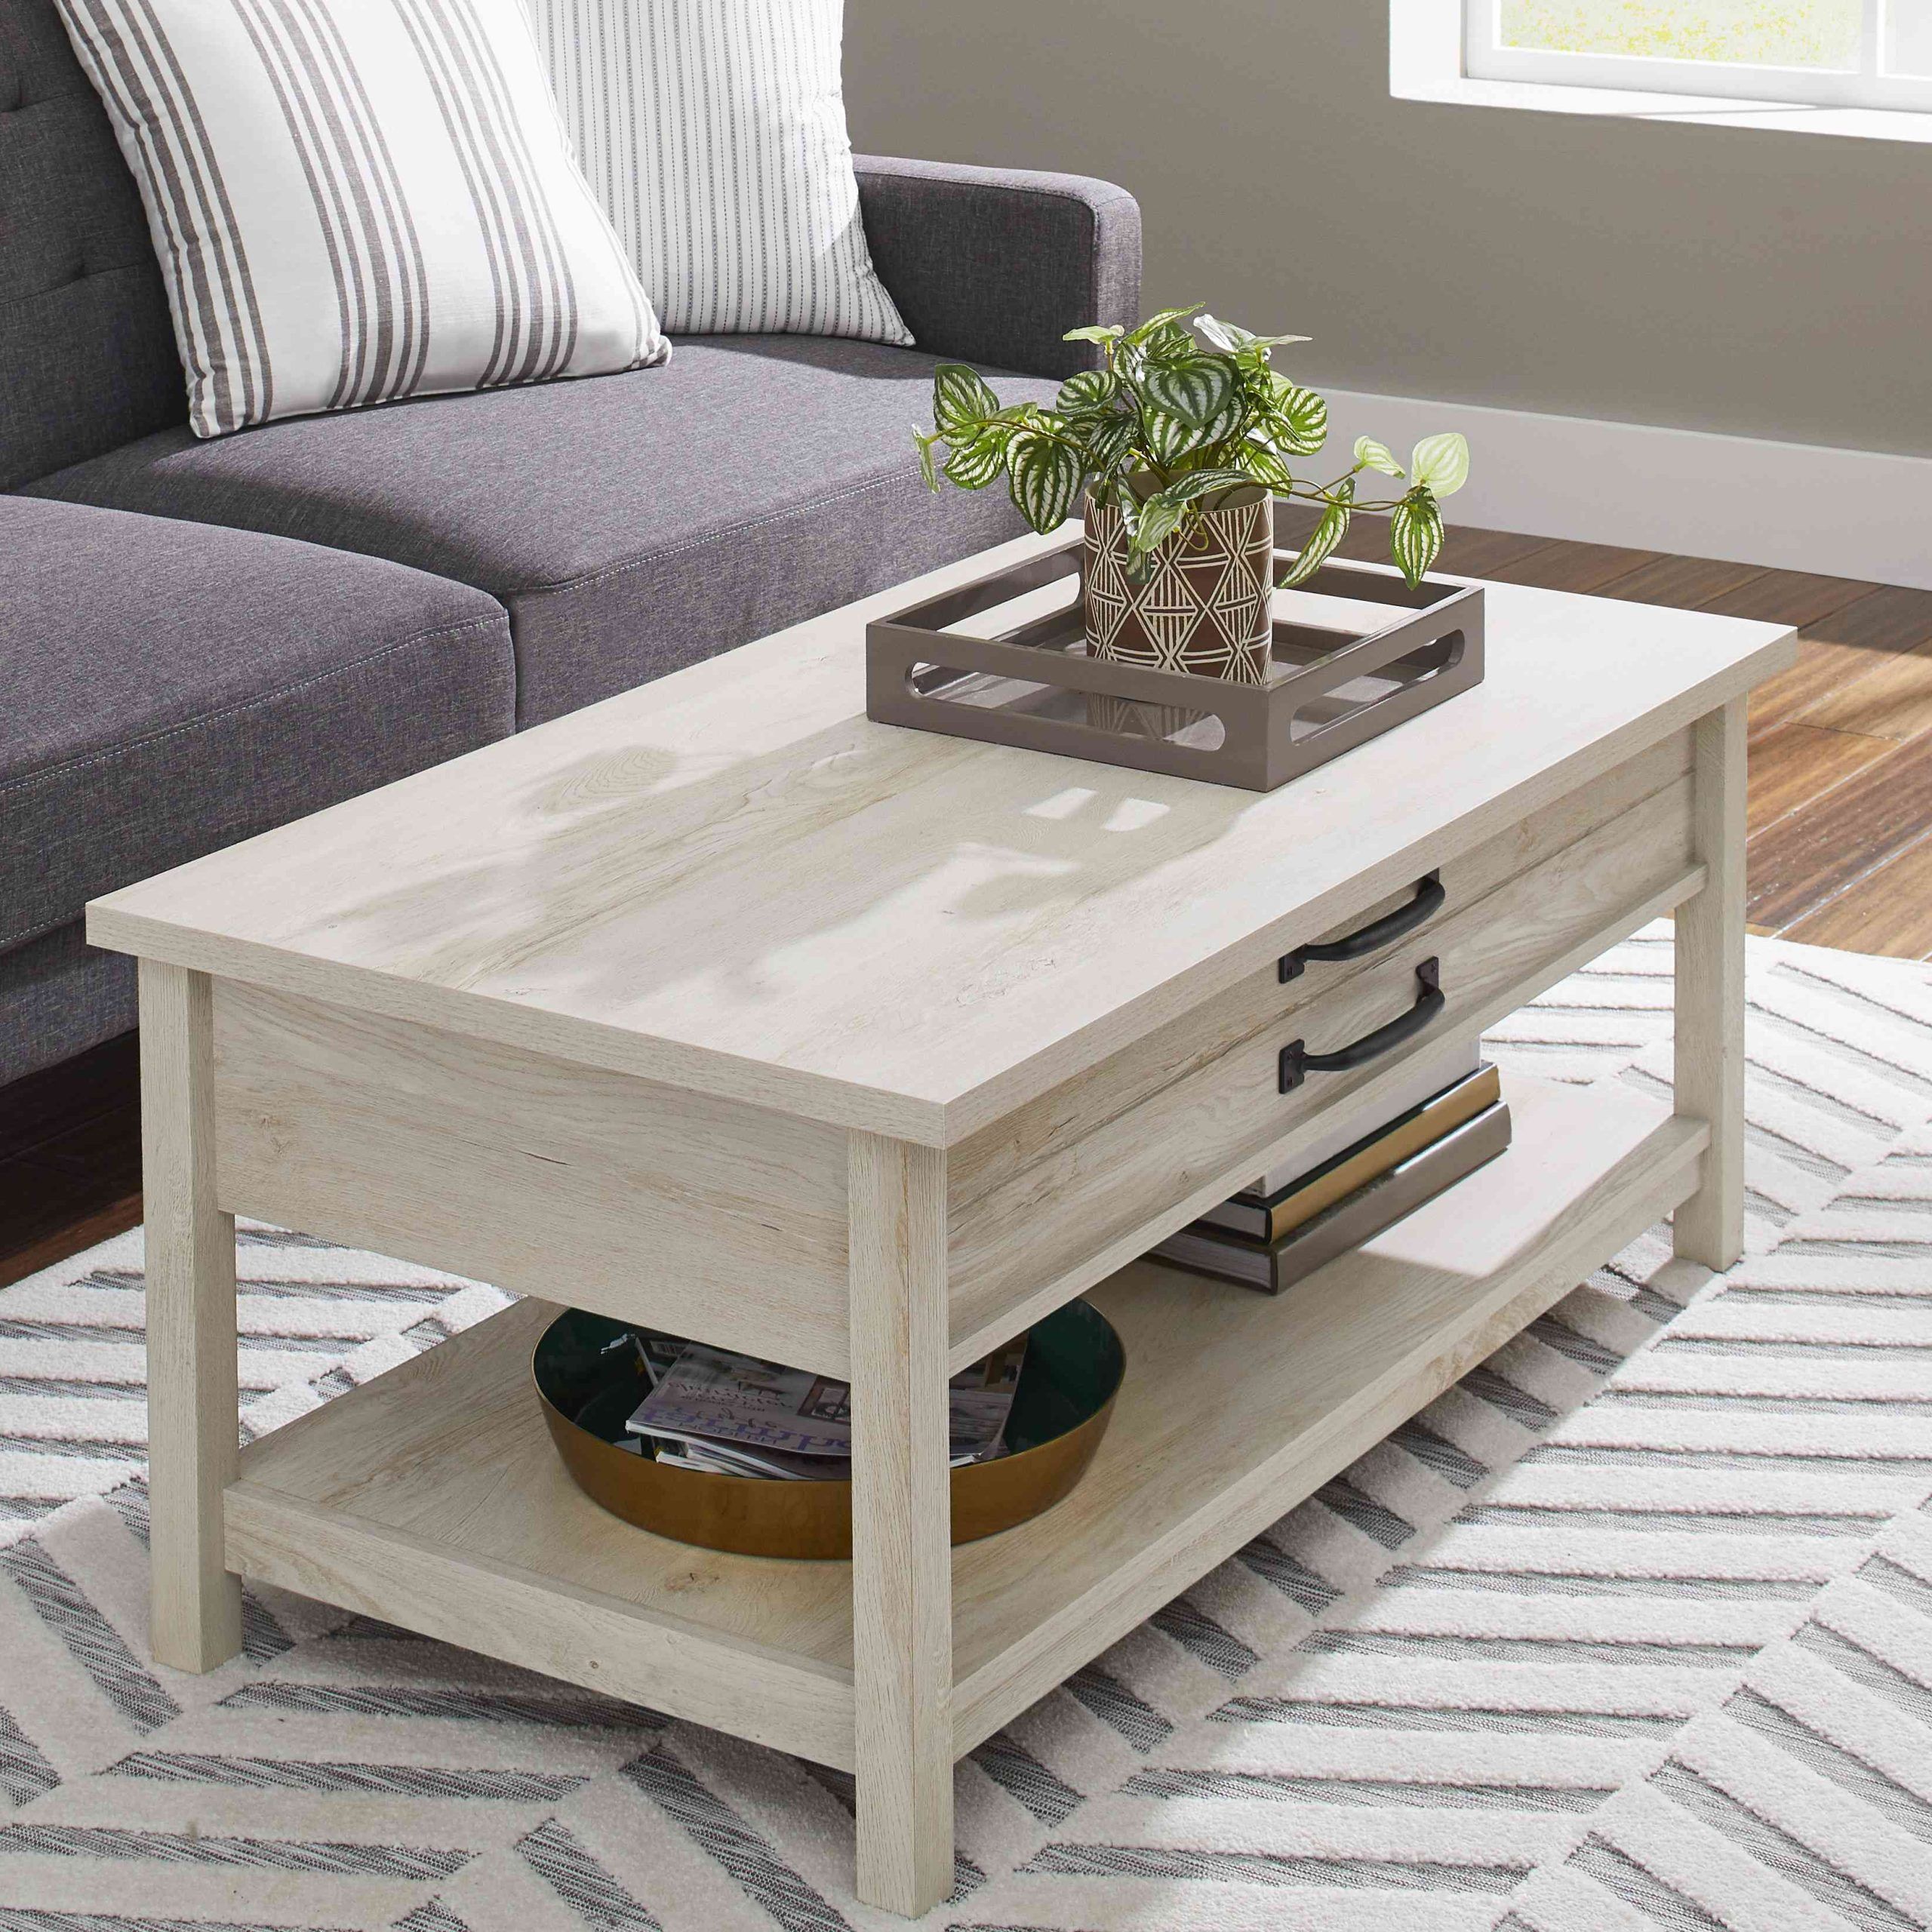 Fashionable Lift Top Coffee Tables With Storage Pertaining To The 9 Best Lift Top Coffee Tables Of  (View 10 of 15)